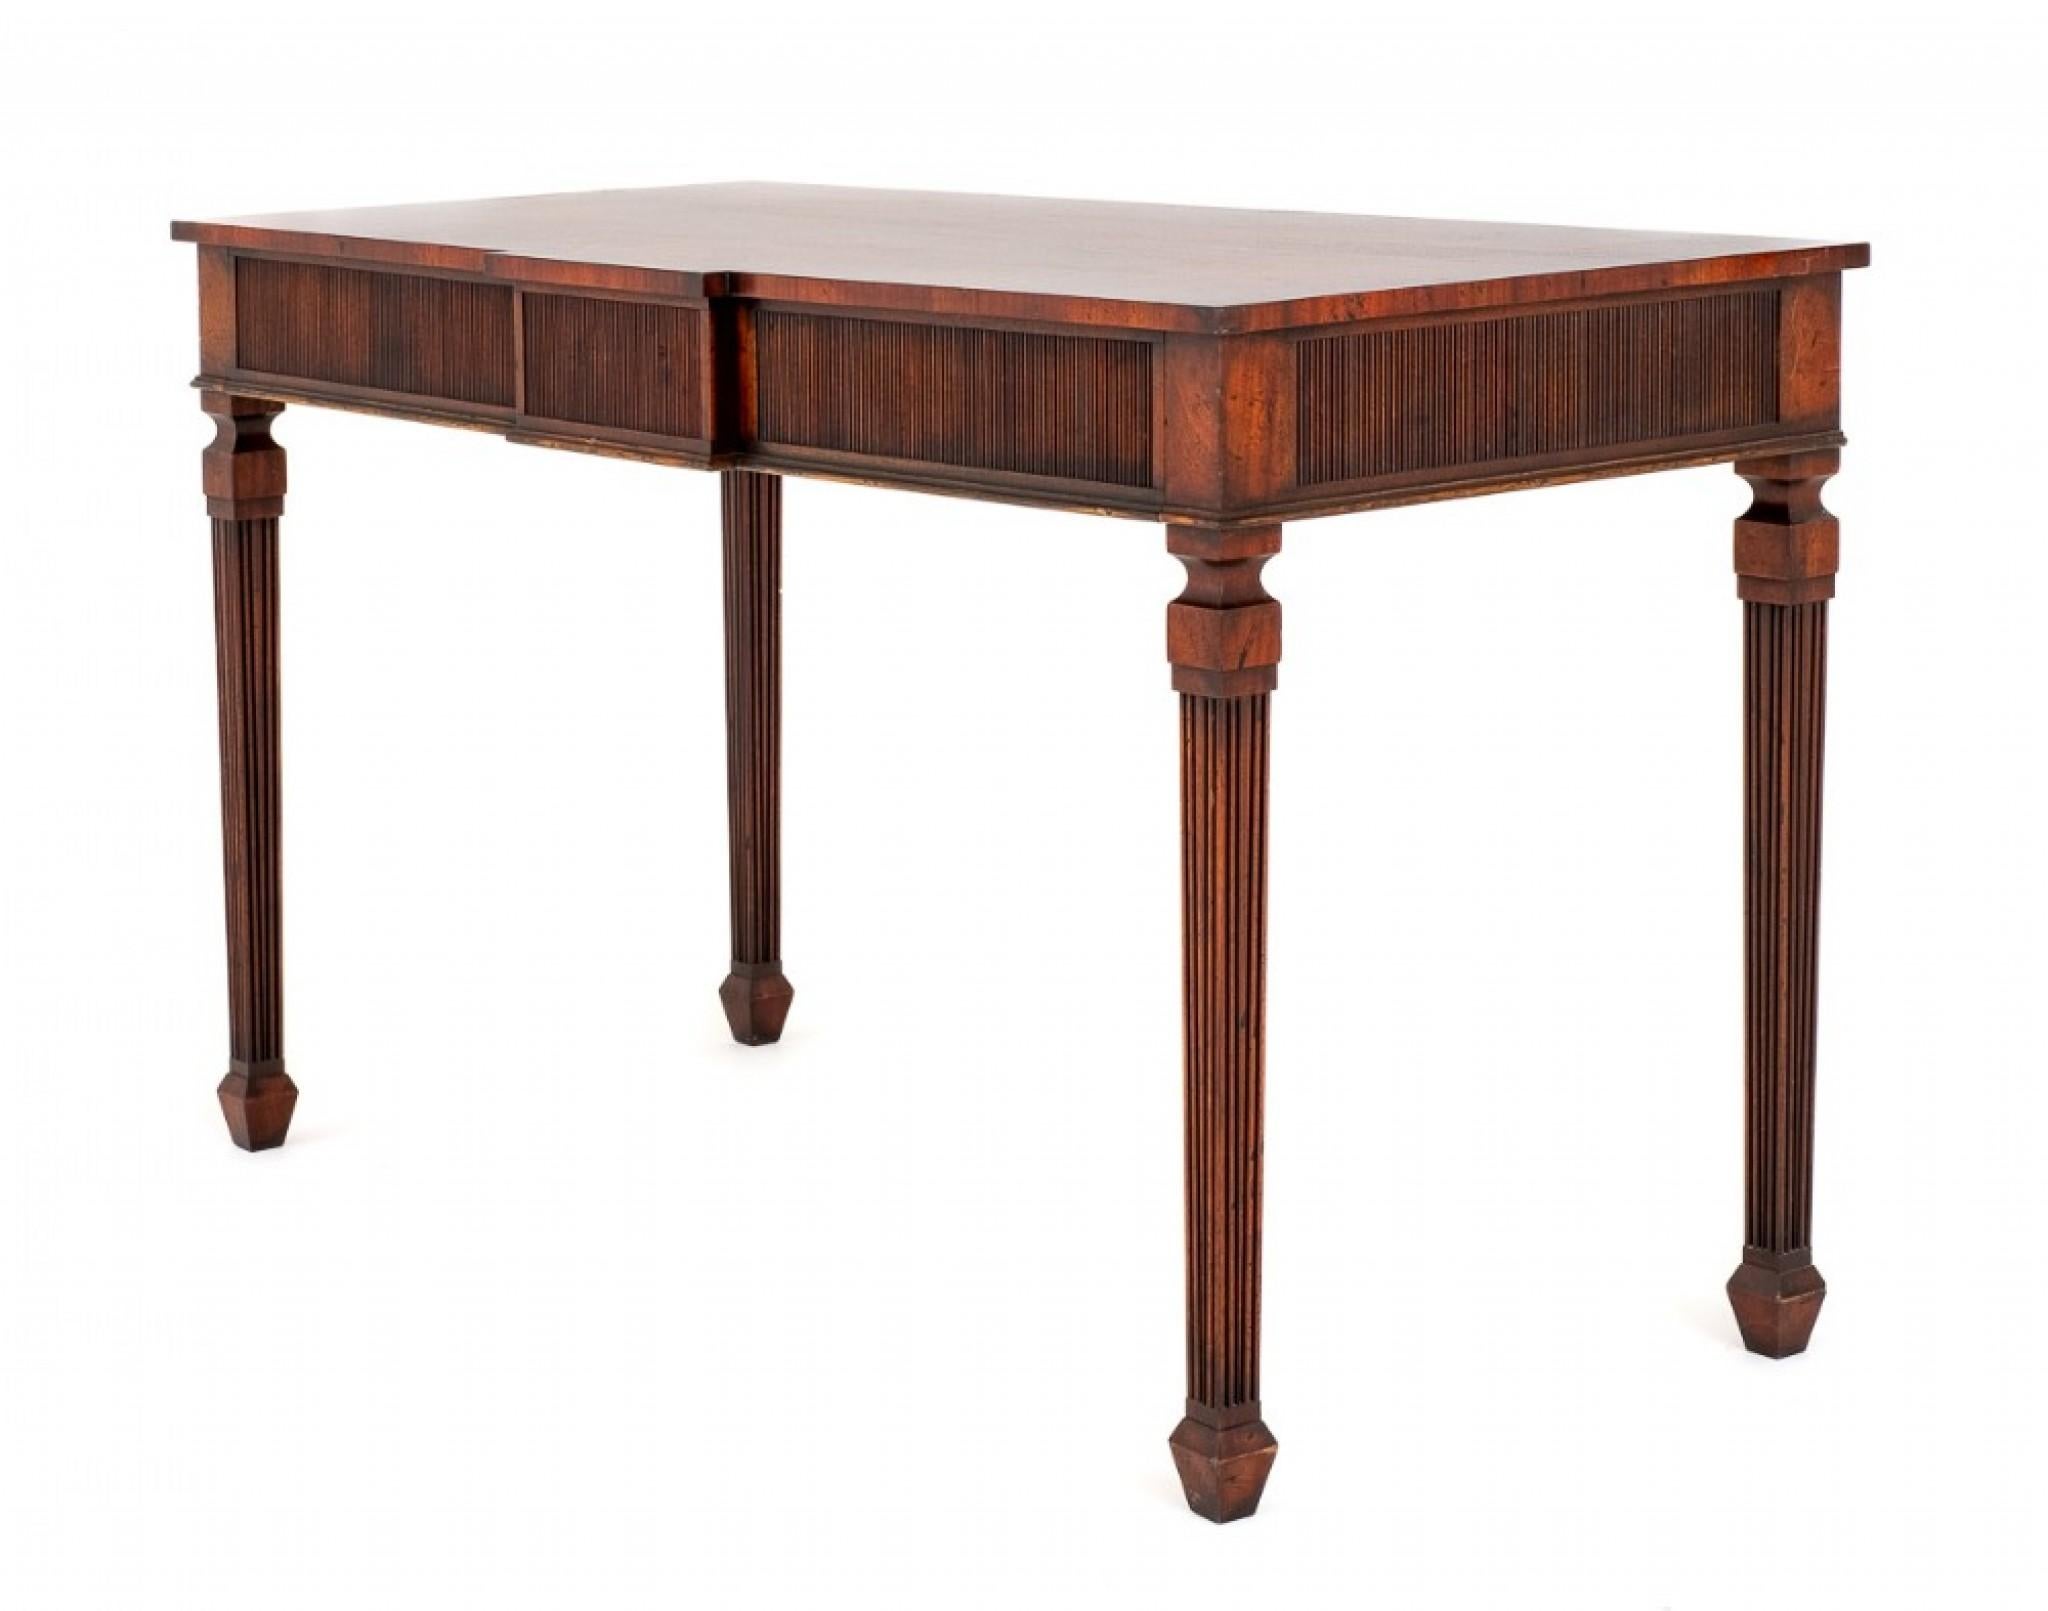 Mahogany Georgian Revival Console Table.
This Console Table Stands Upon Tapered Flutes Legs With Spade Feet.
Featuring 2 Oak Lined Drawers.
circa 1930
The Drawer Fronts Having Reeded Mouldings.
The Top of the Table Having inlaid Fleur De Lys,